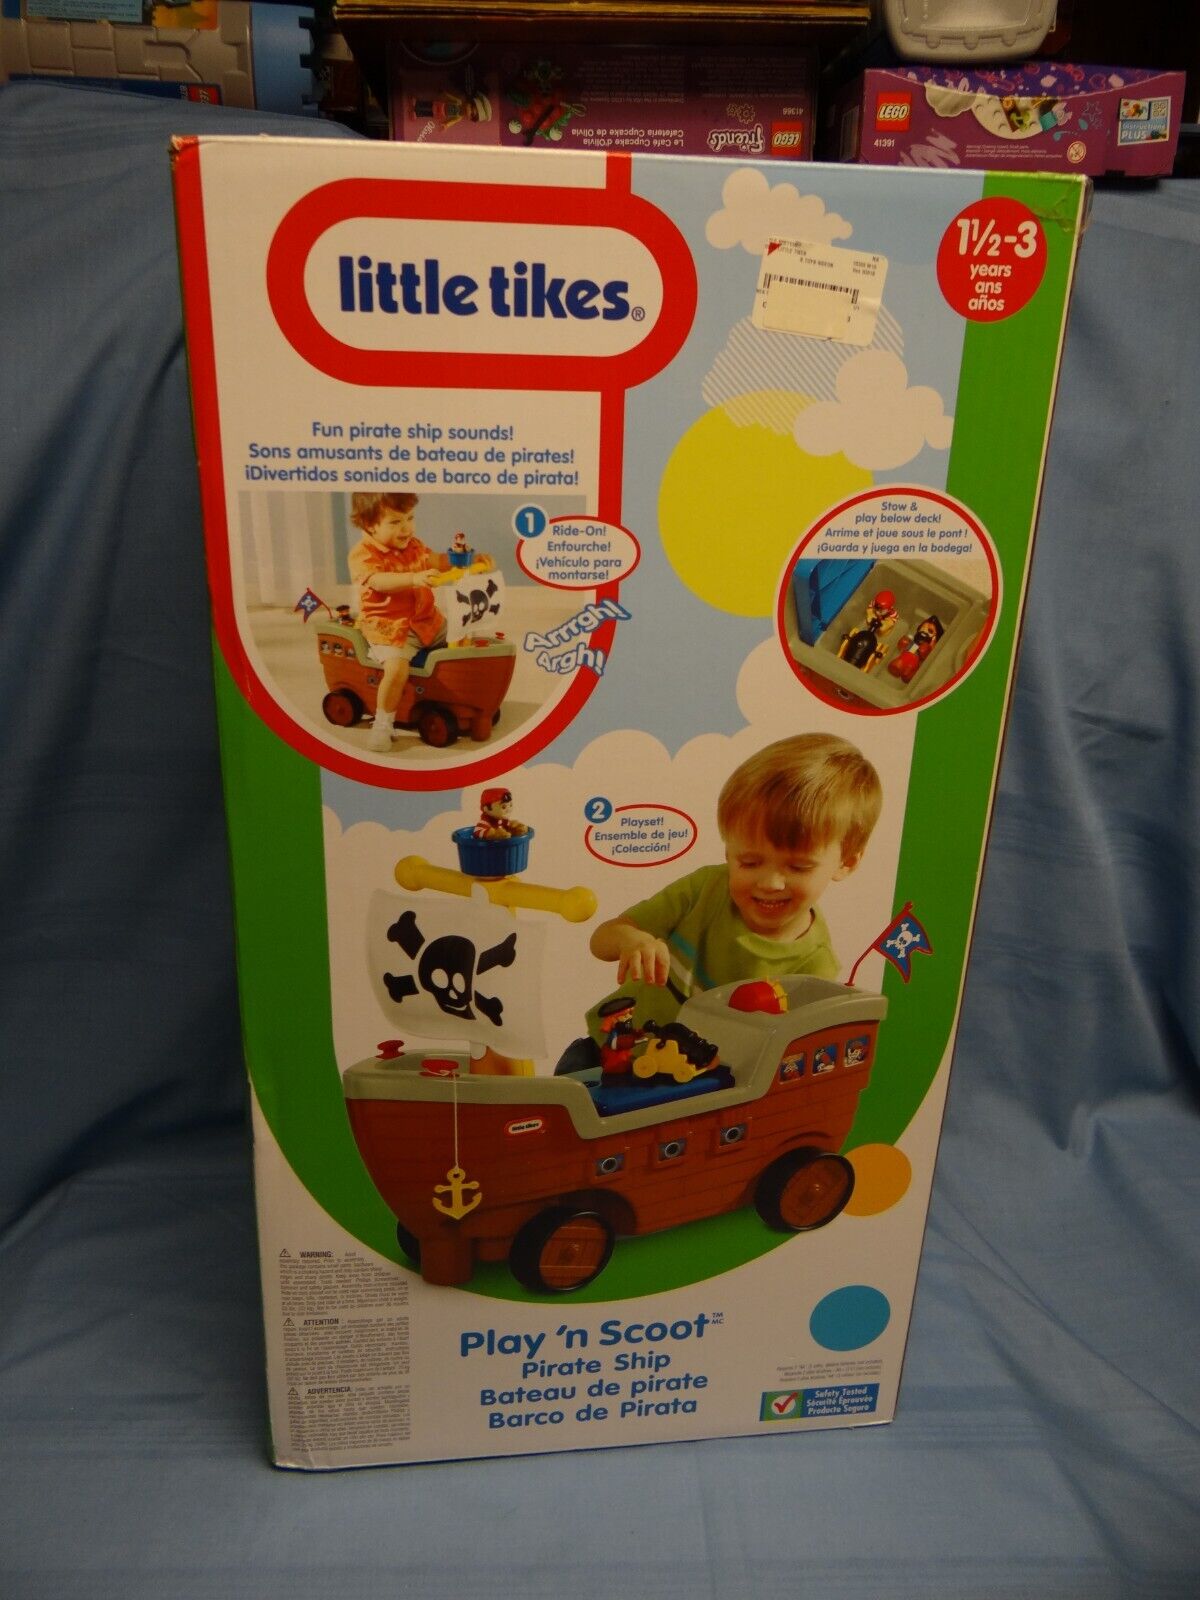 LITTLE TIKES PLAY AND SCOOT PIRATE SHIP Little Tikes does not apply